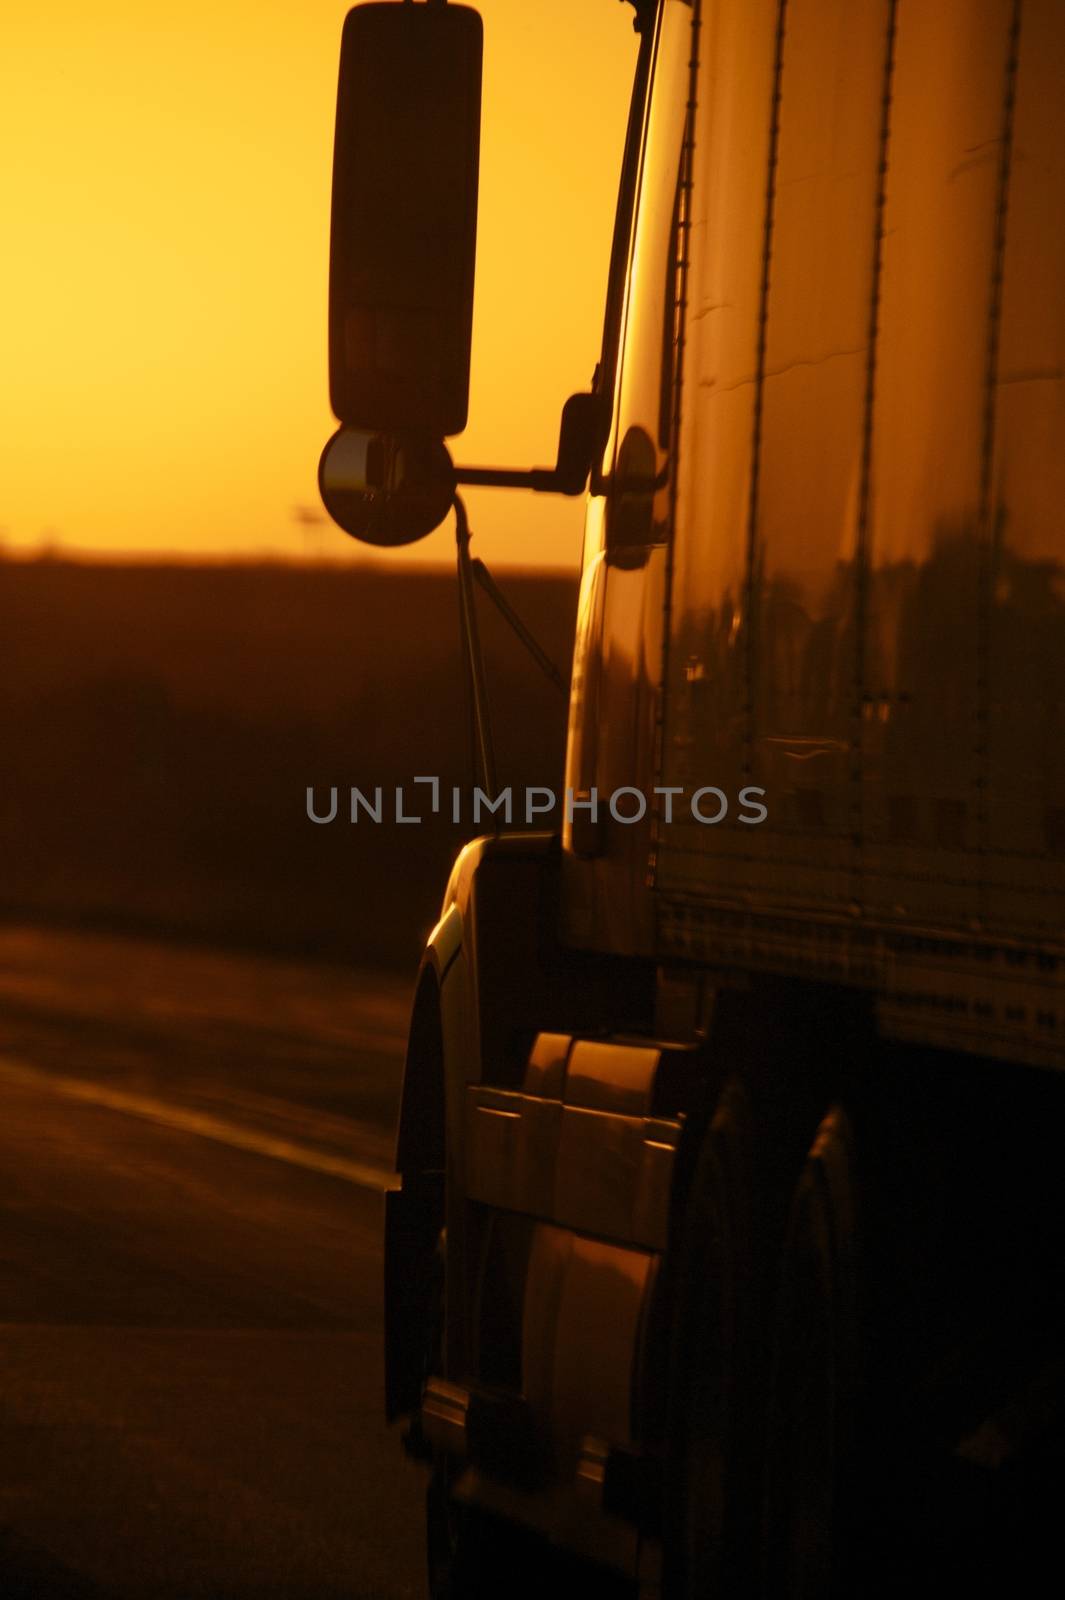 Sunset Highway. Truck on the Highway - Sunset. Vertical Photo. Heavy Long Distance American Transportation.